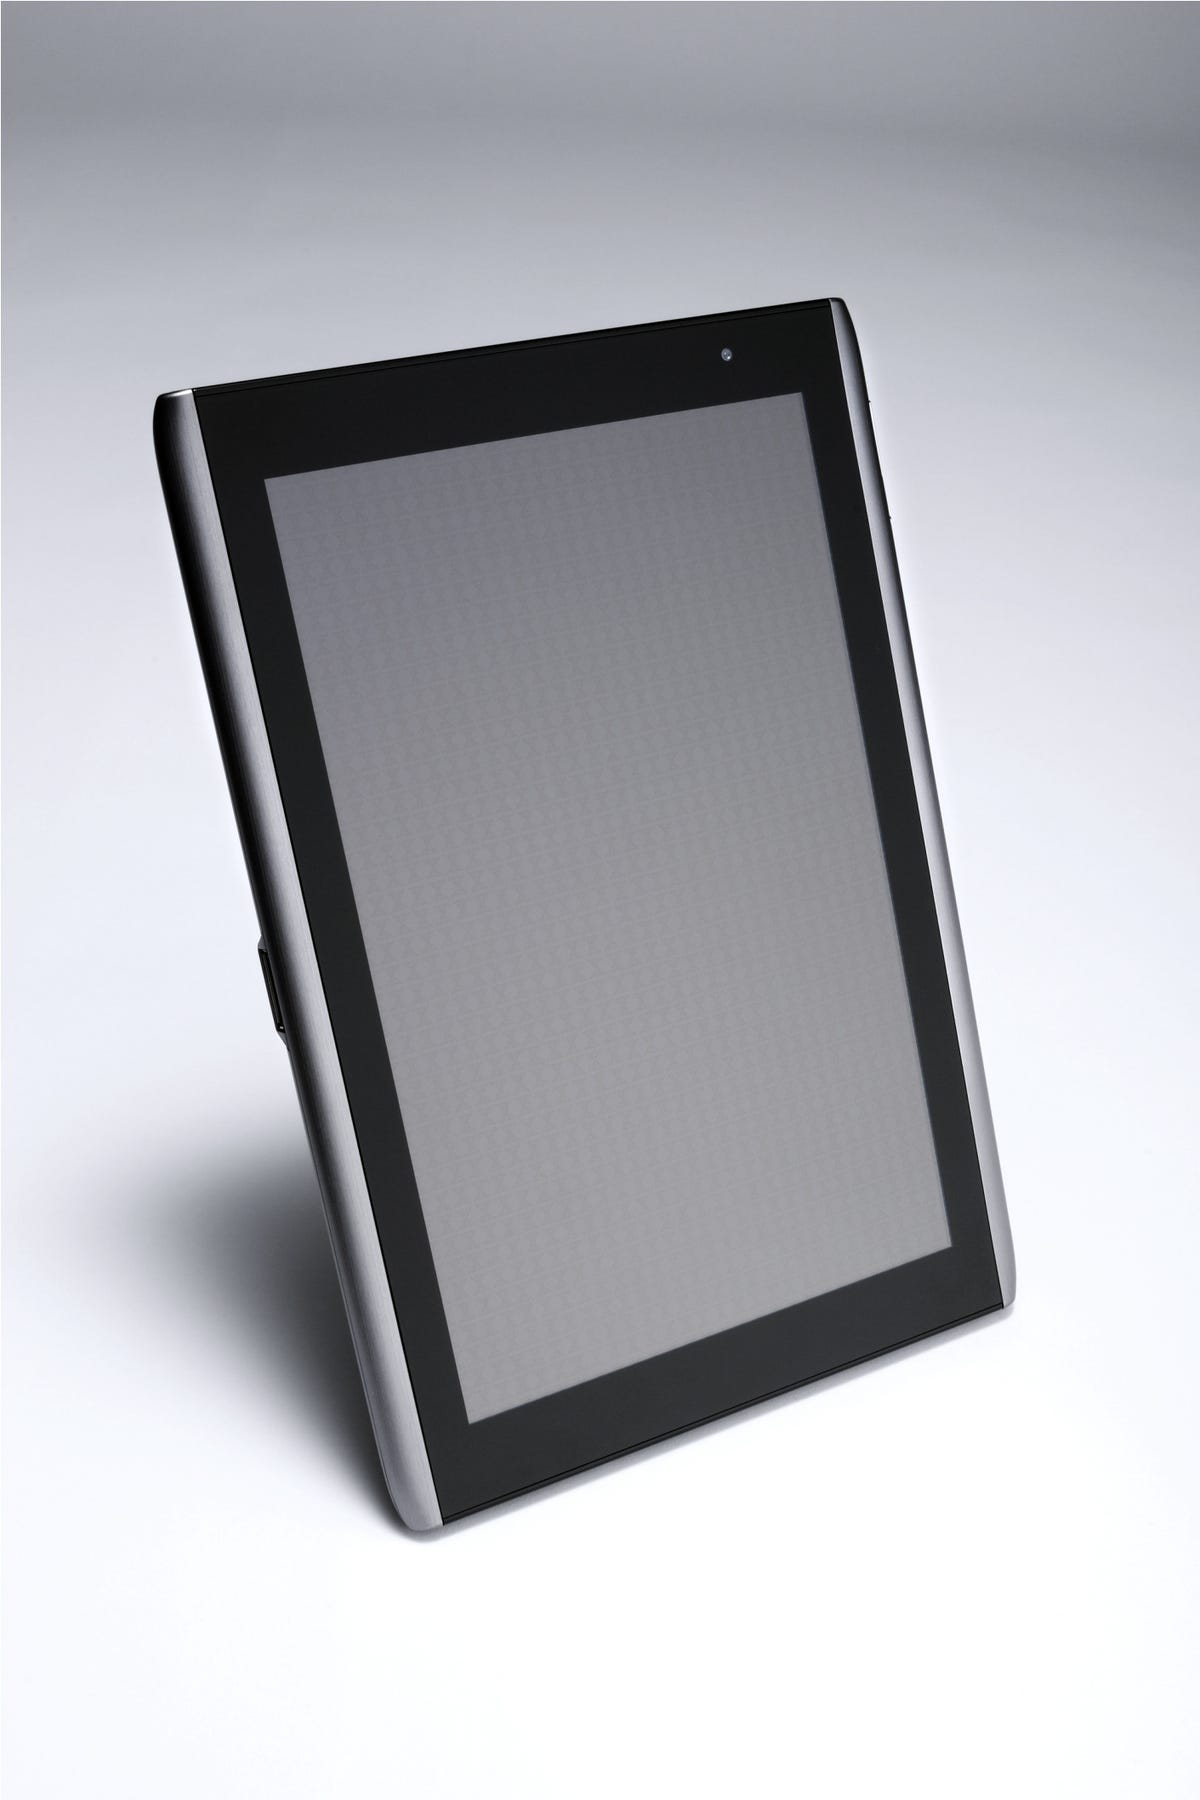 Acer_Android_Tablet_02_1.jpg